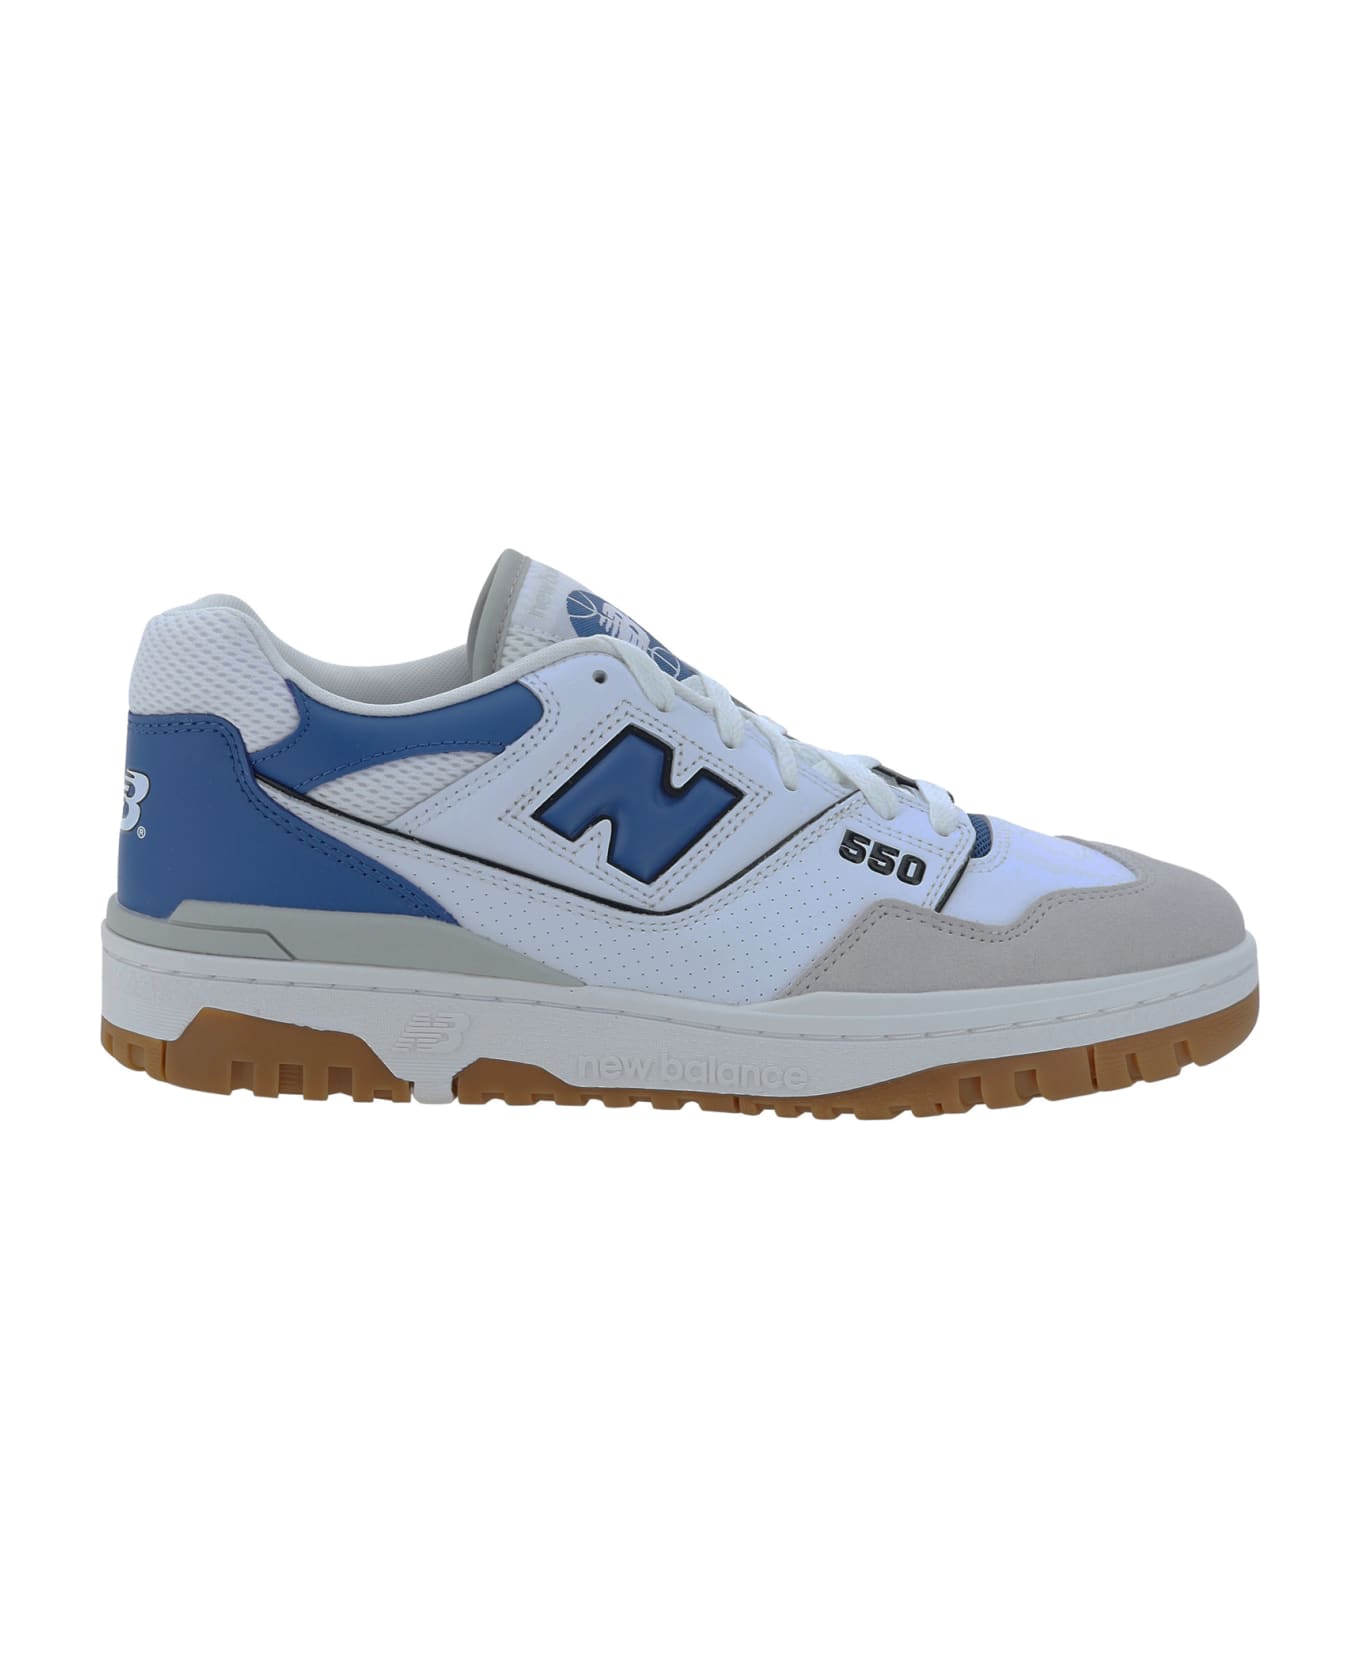 New Balance 550 Sneakers - White/blue